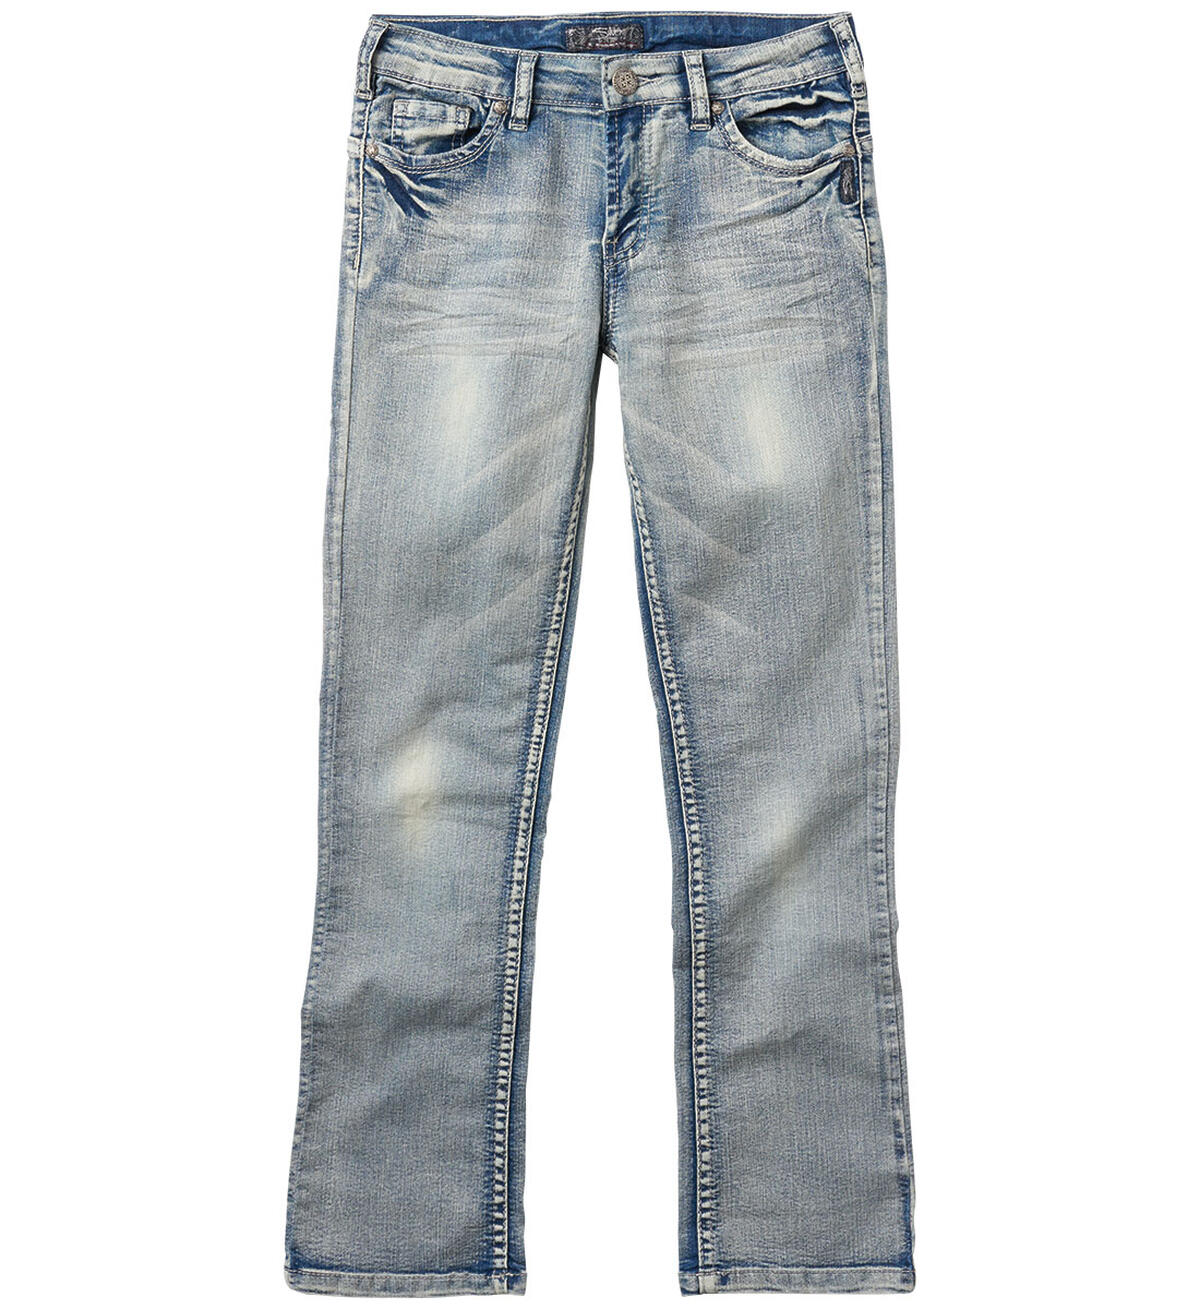 Tammy Bootcut Jeans in Bleached Wash (7-16), , hi-res image number 0